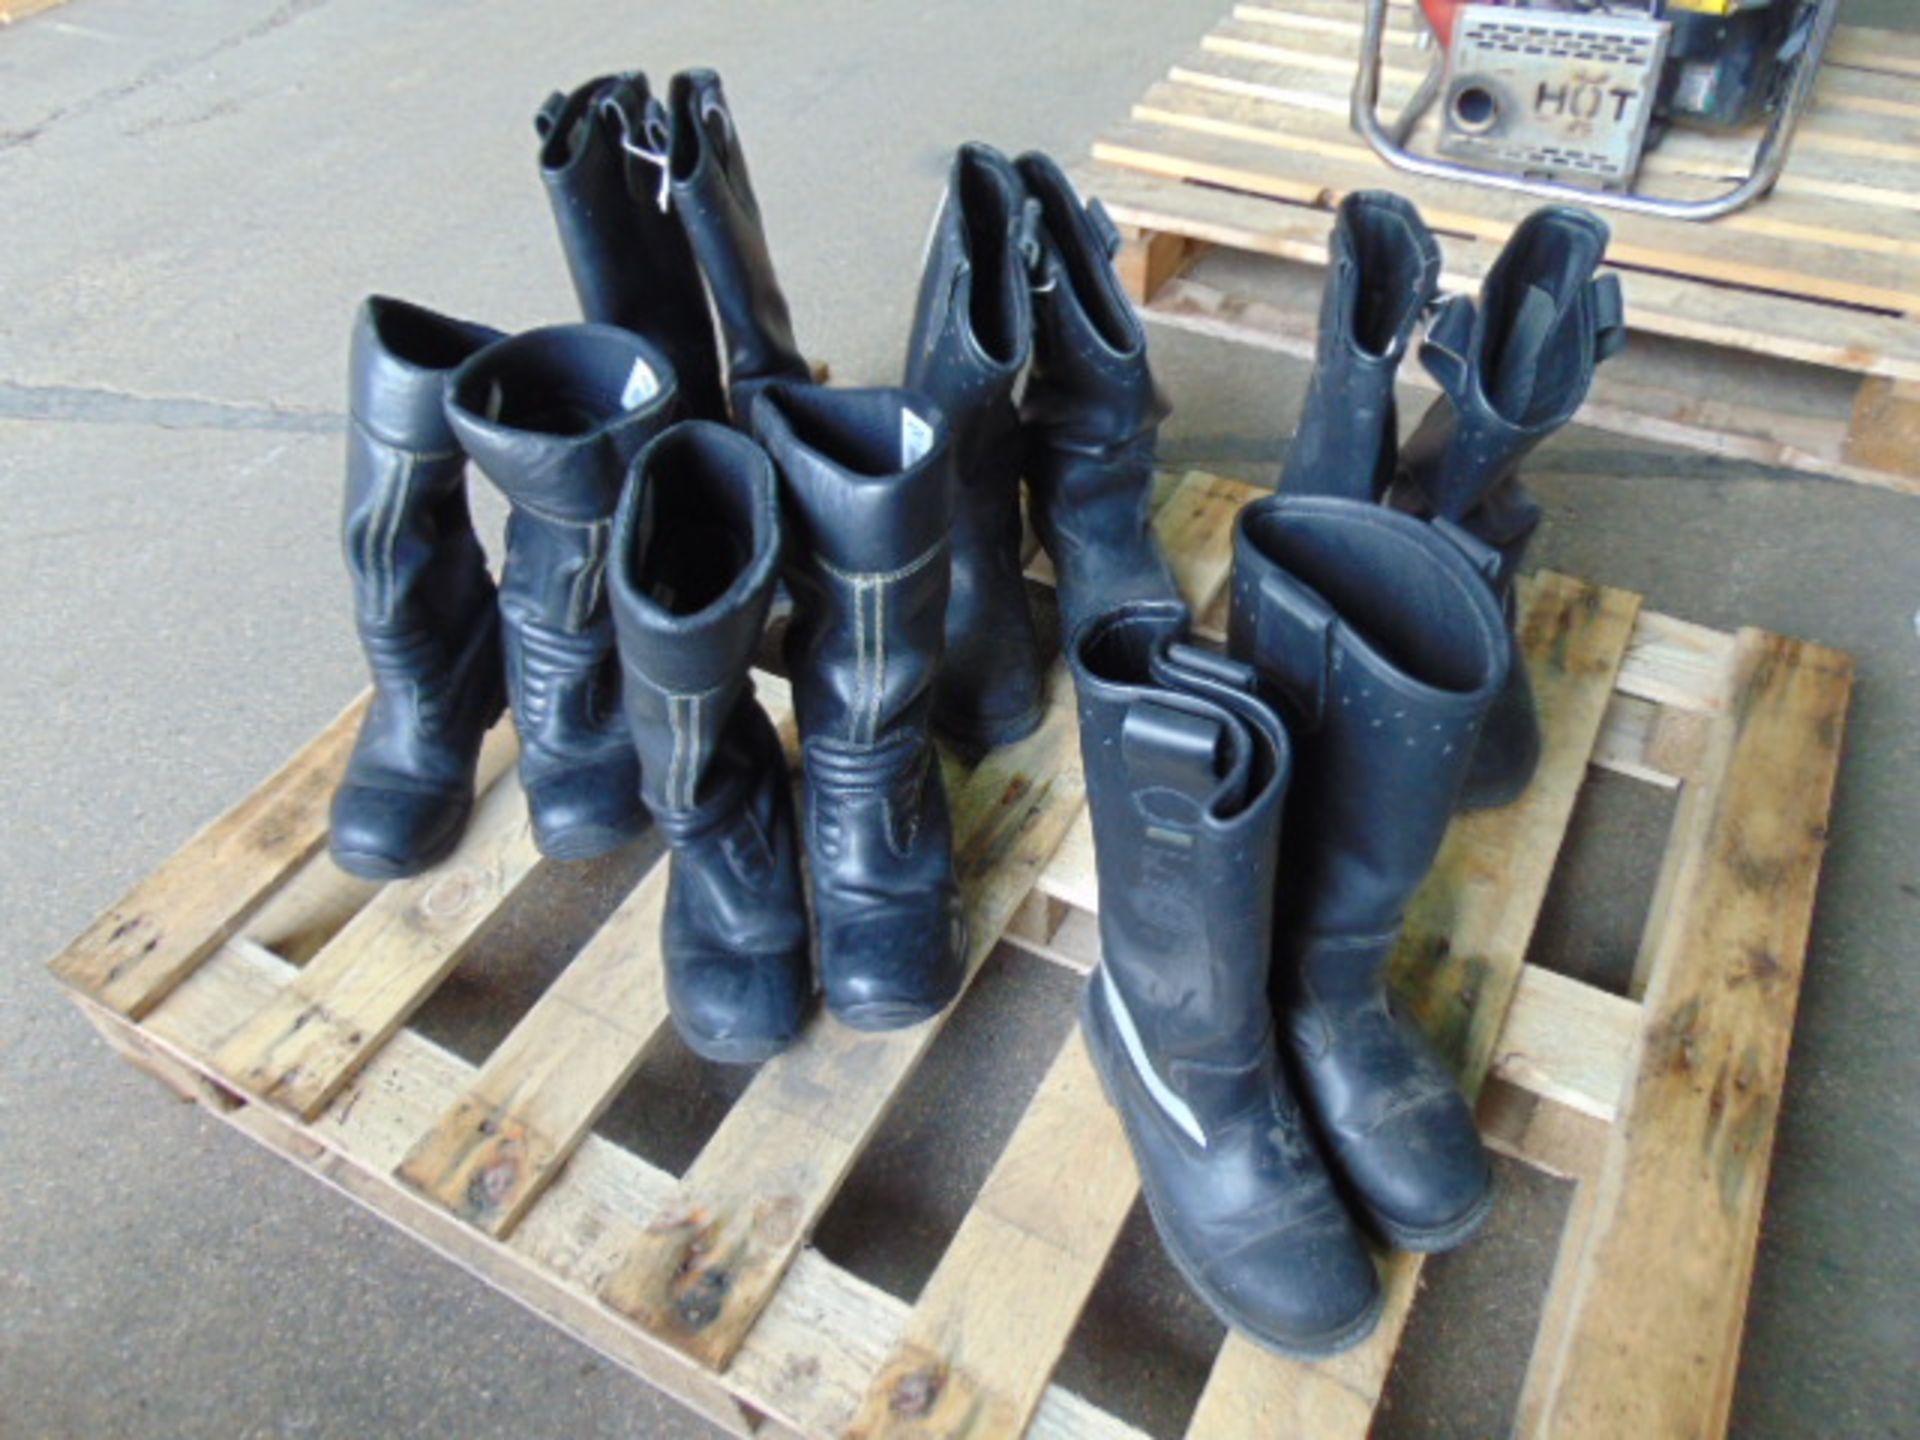 6 Mixed Pairs of Jolly Firefighters, Bikers, Rigger Boots Waterproof